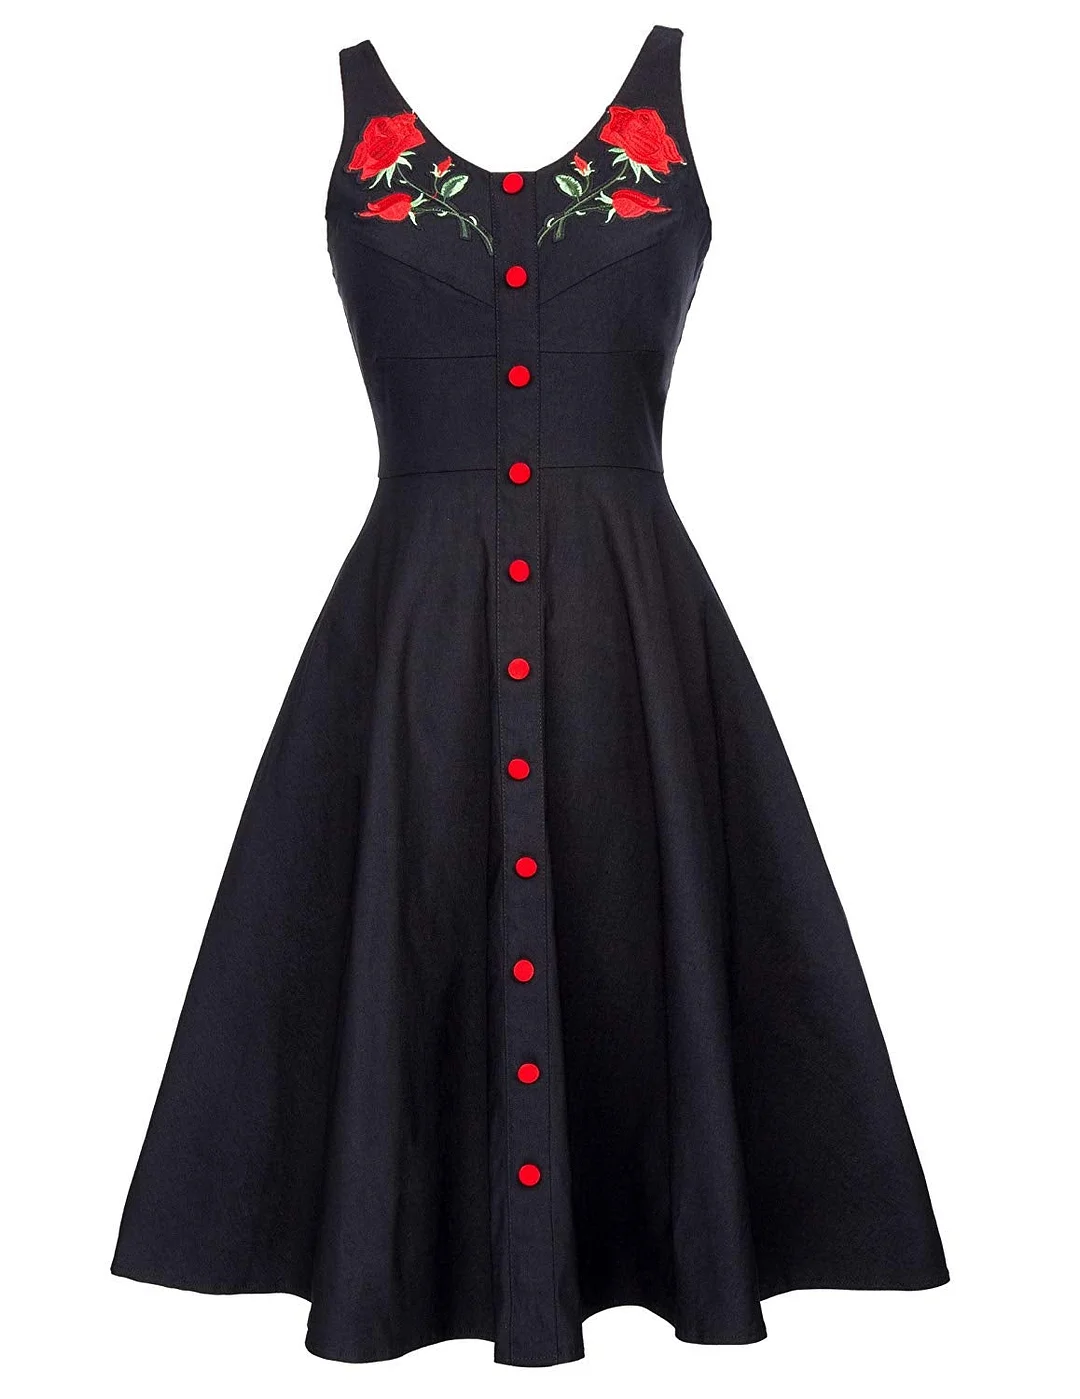 Belle Poque Women's Vintage Dress Sleeveless Flower Embroidery A-Line Swing Party Dress